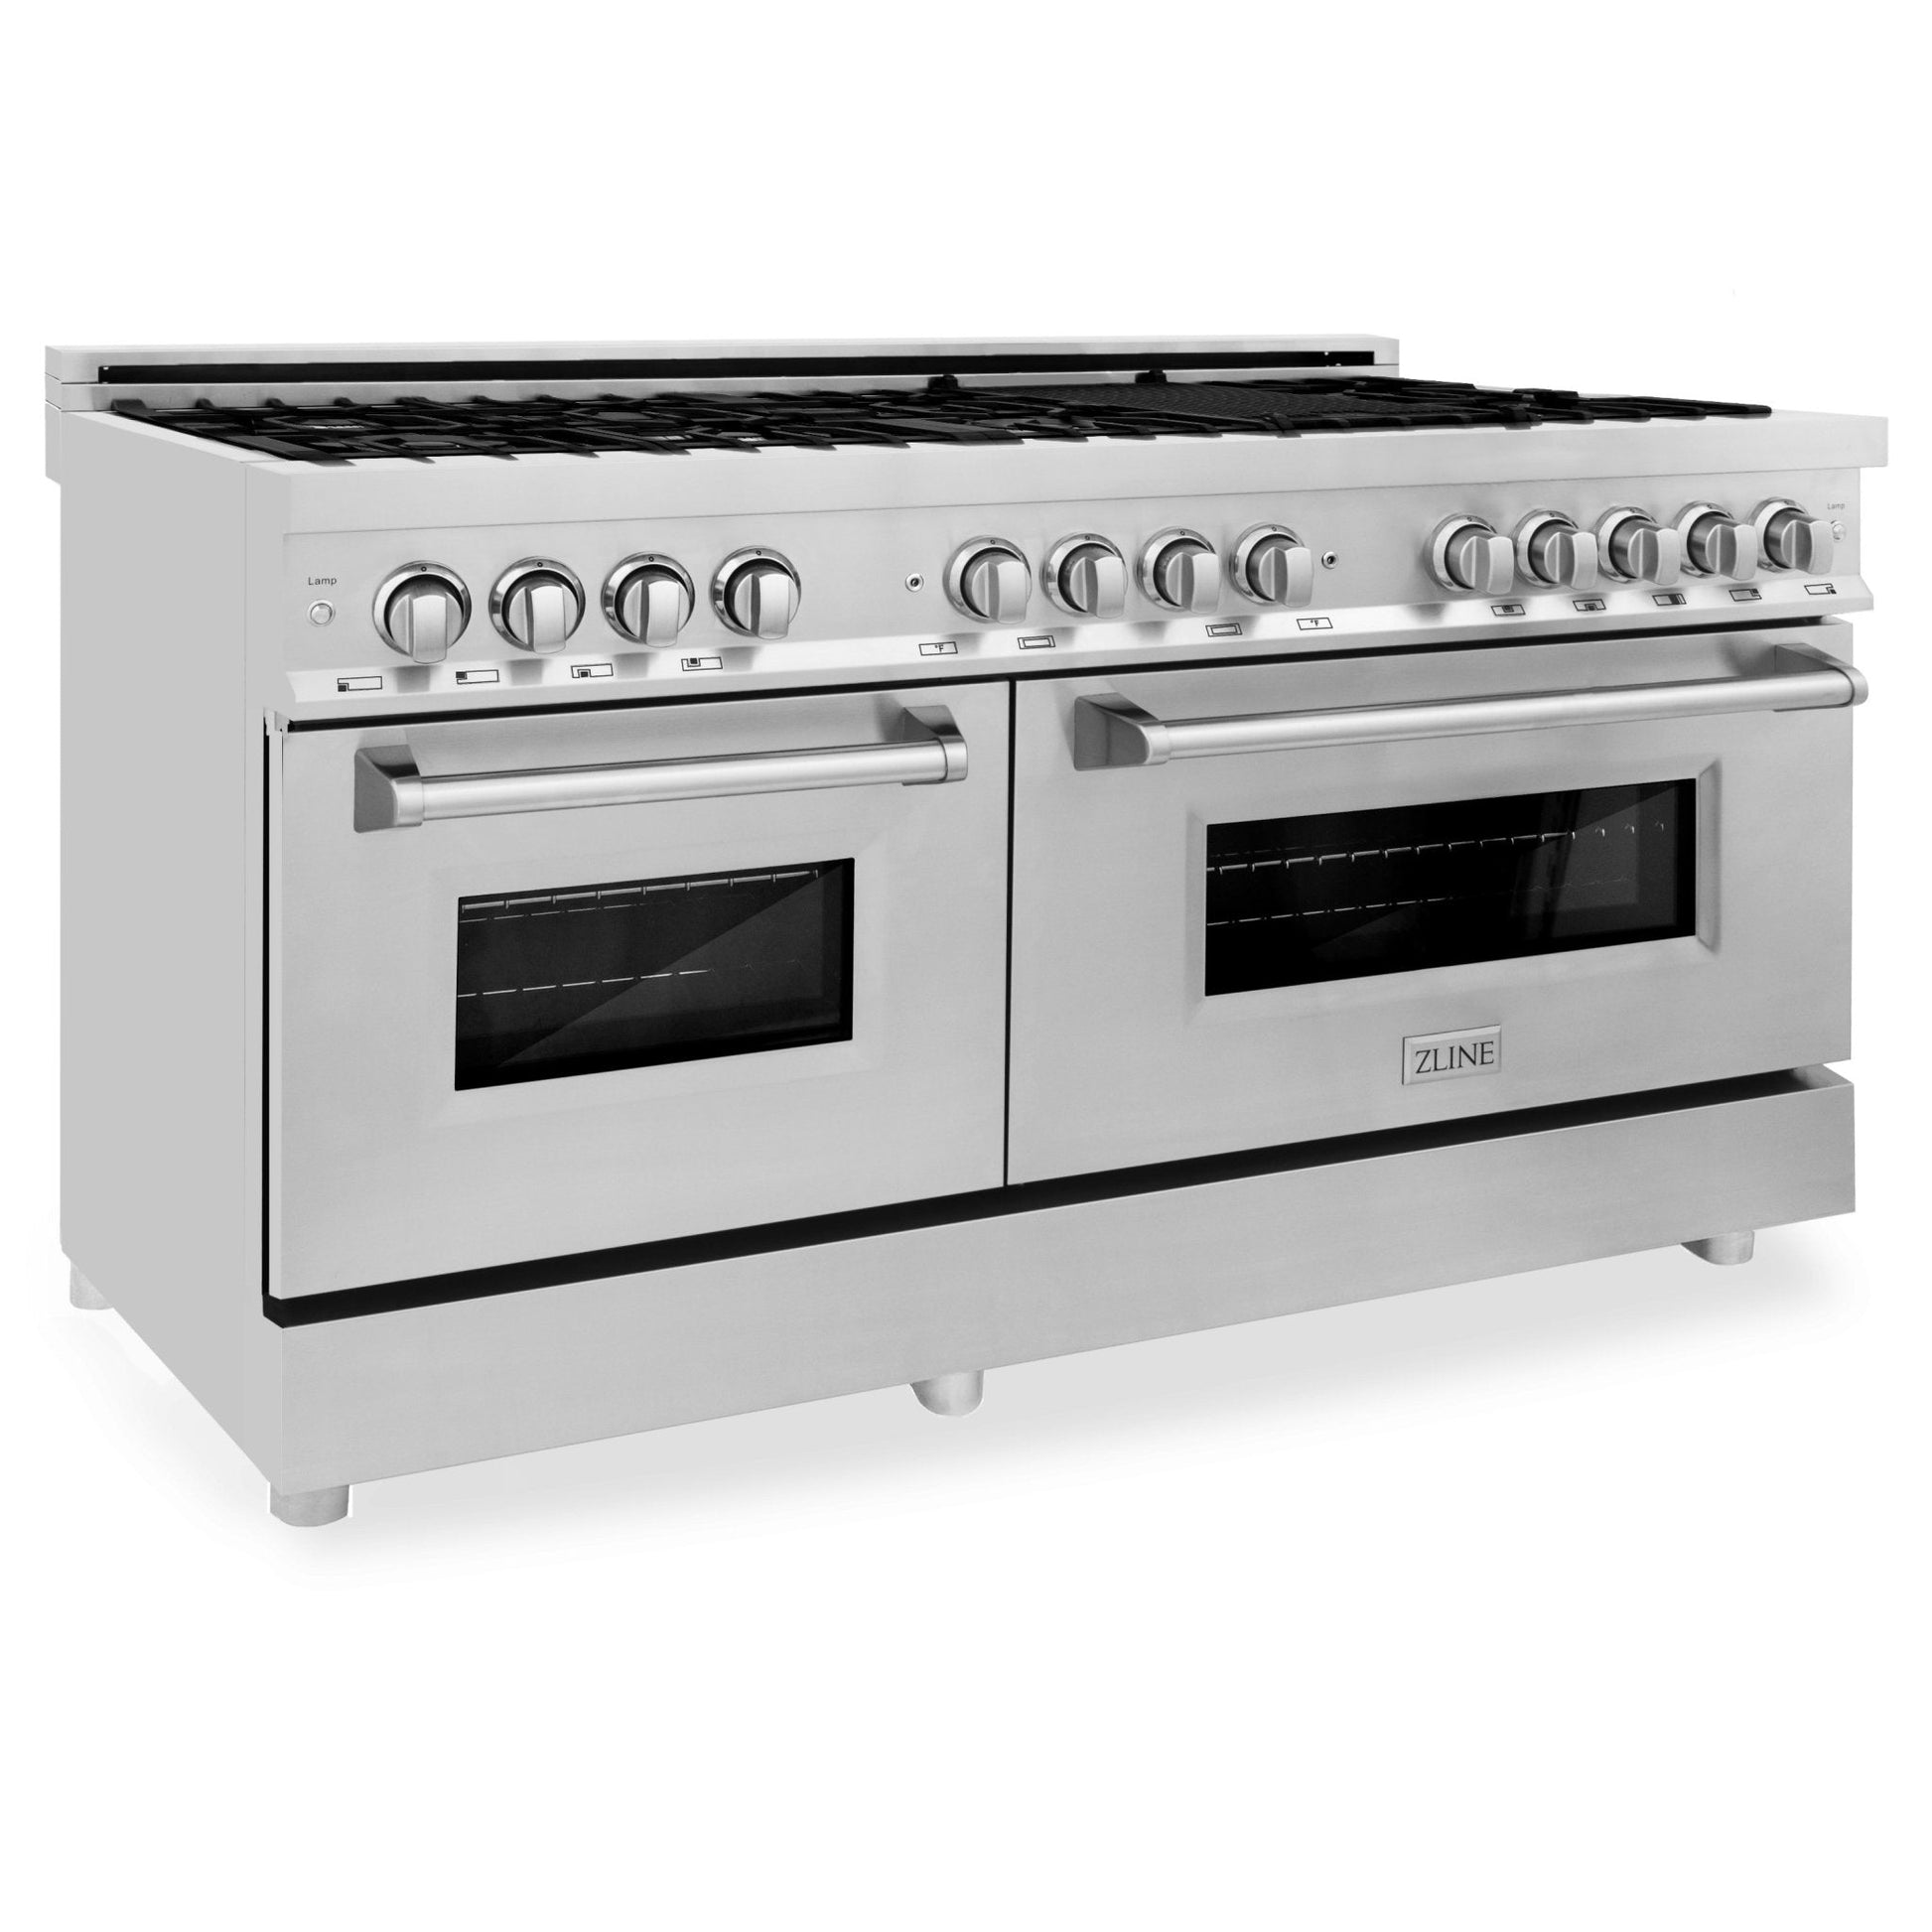 ZLINE 60 in. 7.4 cu. ft. Dual Fuel Range with Gas Stove and Electric Oven in Stainless Steel (RA60) side, ovens closed.